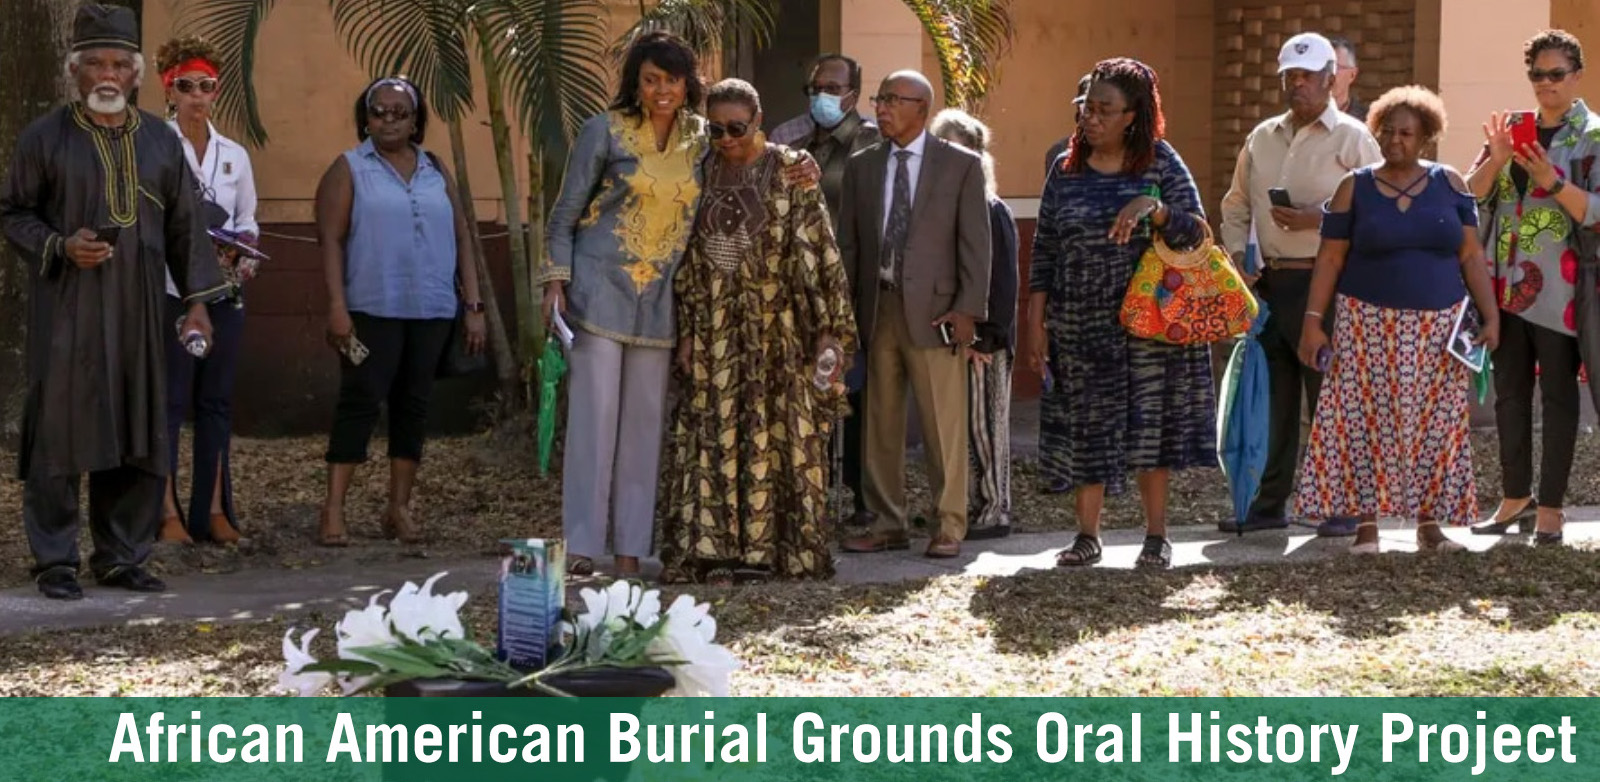 African American Burial Grounds Oral History Project